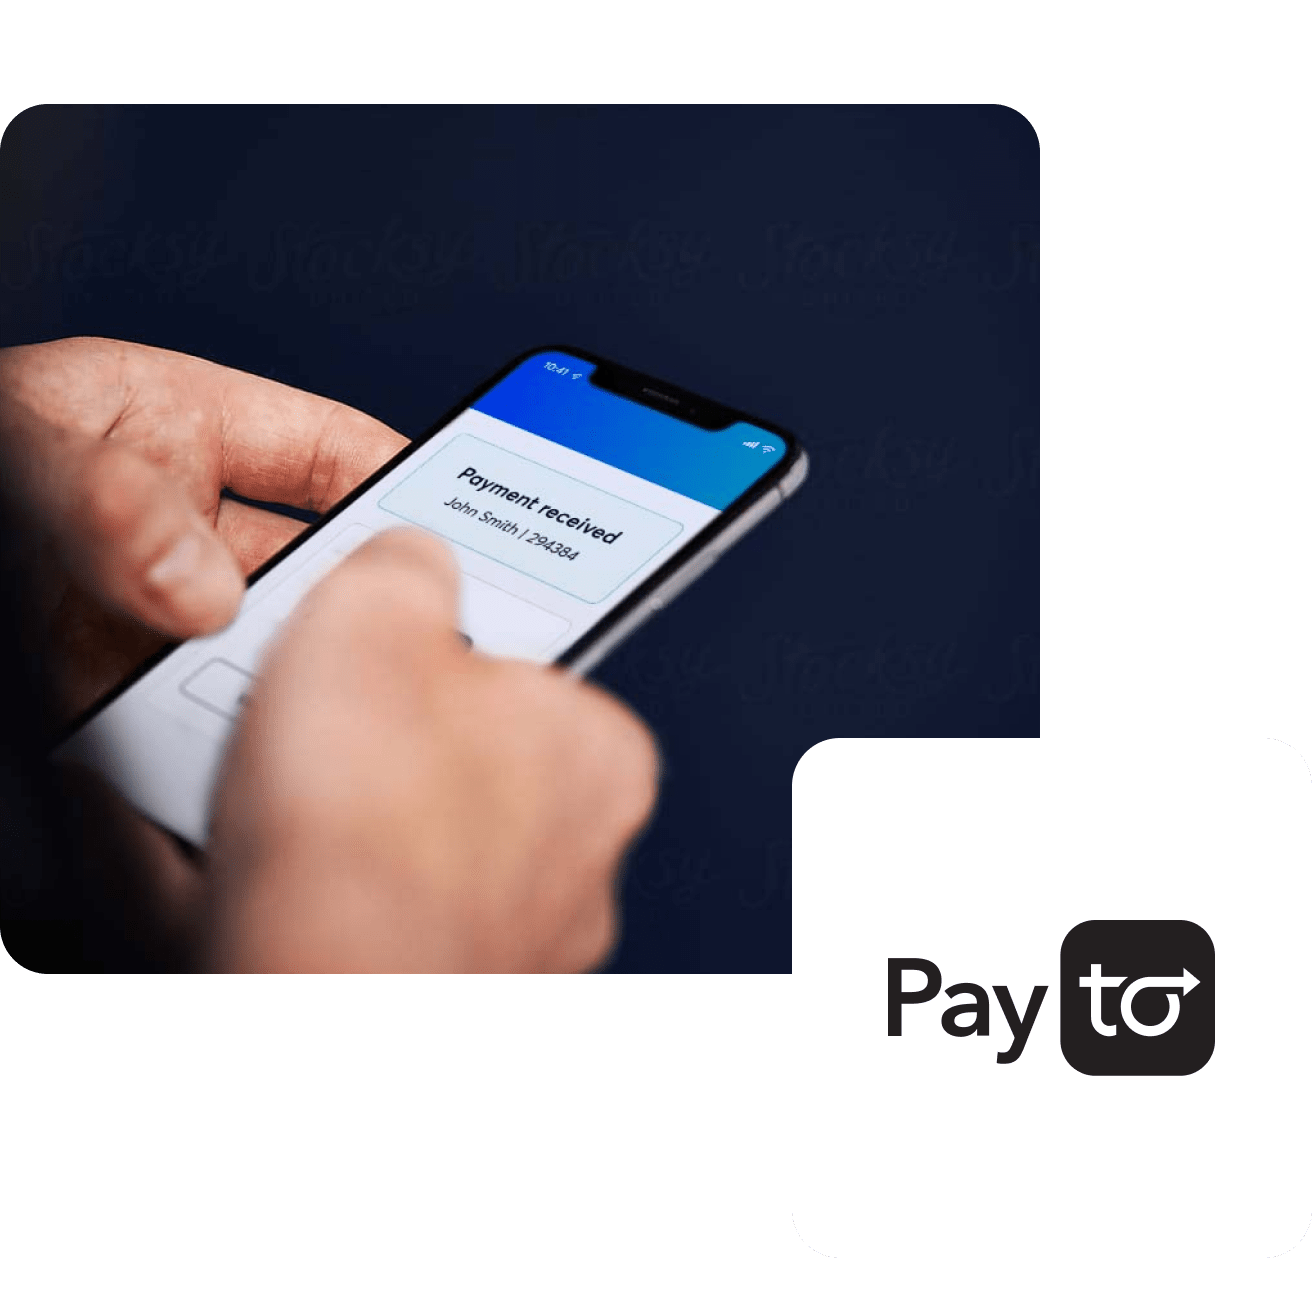 Real-time payments, with PayTo